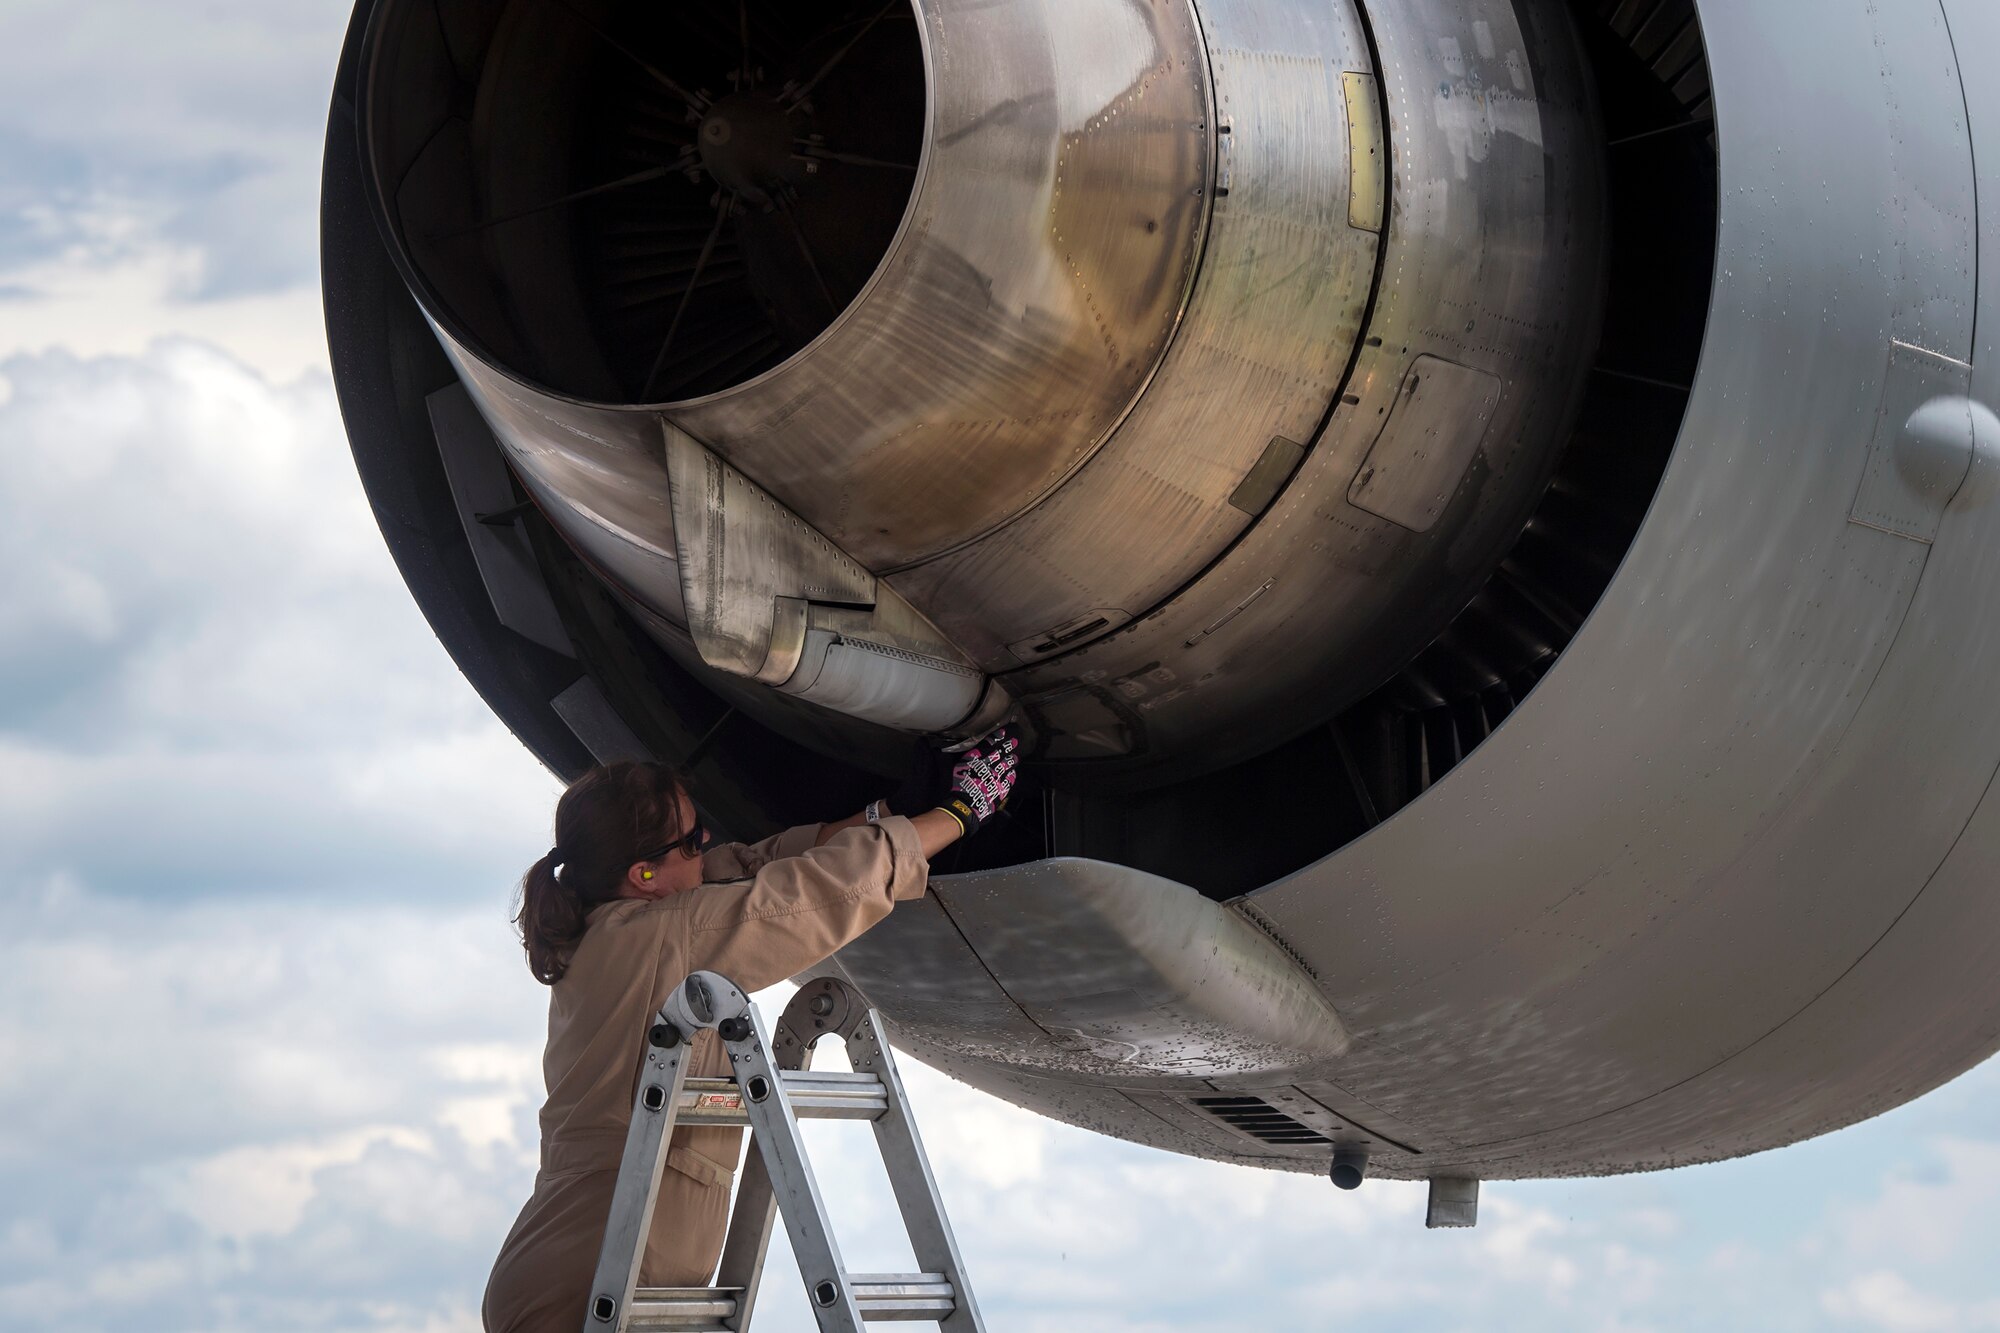 Master Sgt. Angelia Gholson, 164th Aircraft Maintenance Squadron flying crew chief, Memphis Air National Guard Base, TN, inspects the engine of a C-17 Globemaster III, July 5, 2018, at Moody Air Force Base, Ga. Airmen loaded approximately 68,000 pounds of cargo onto a C-17 Globemaster III to aid the 75th Fighter Squadron (FS) prior to a deployment. The 75th FS and supporting units recently deployed to an undisclosed location in support of Operation Spartan Shield. (U.S. Air Force photo by Airman 1st Class Eugene Oliver)